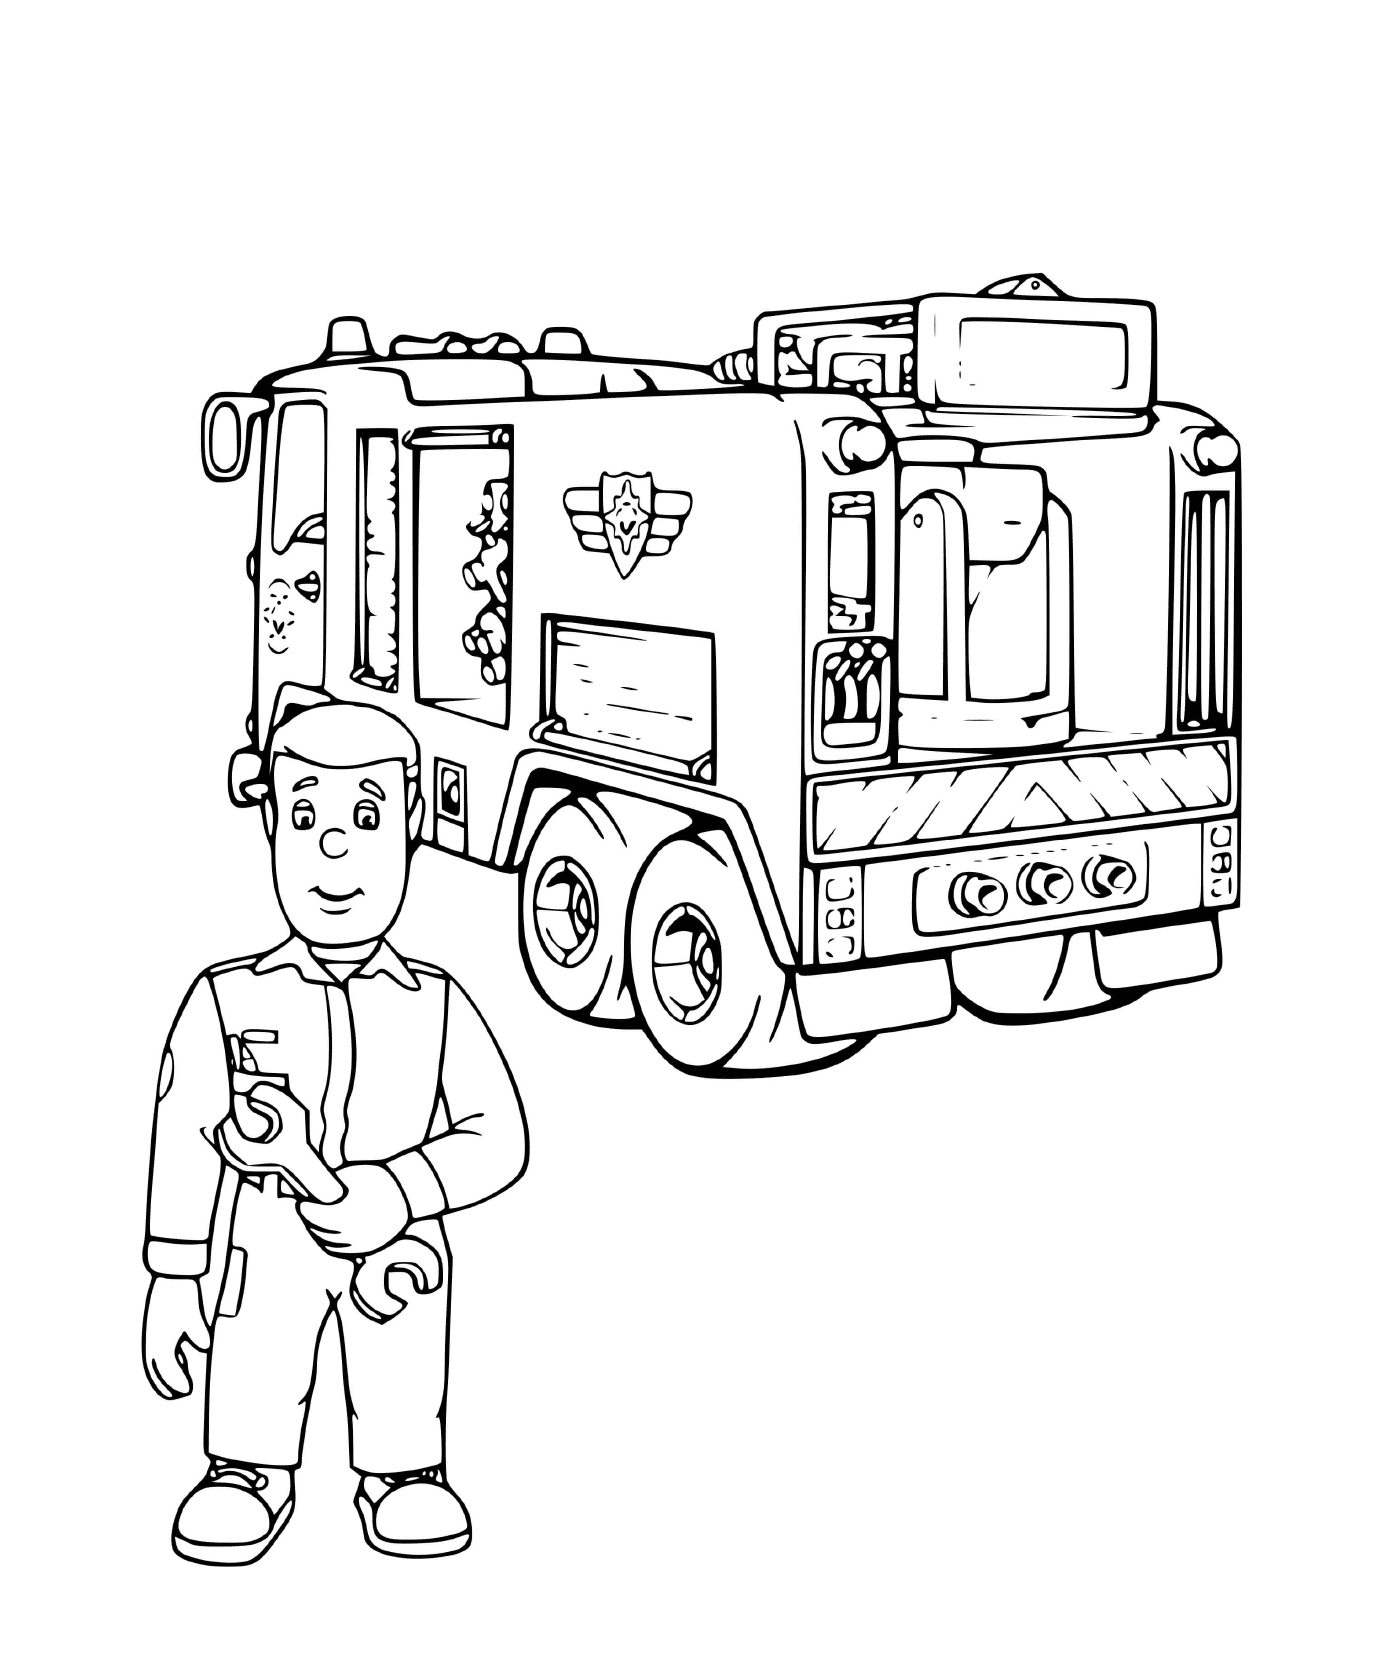  A man and a fire truck 